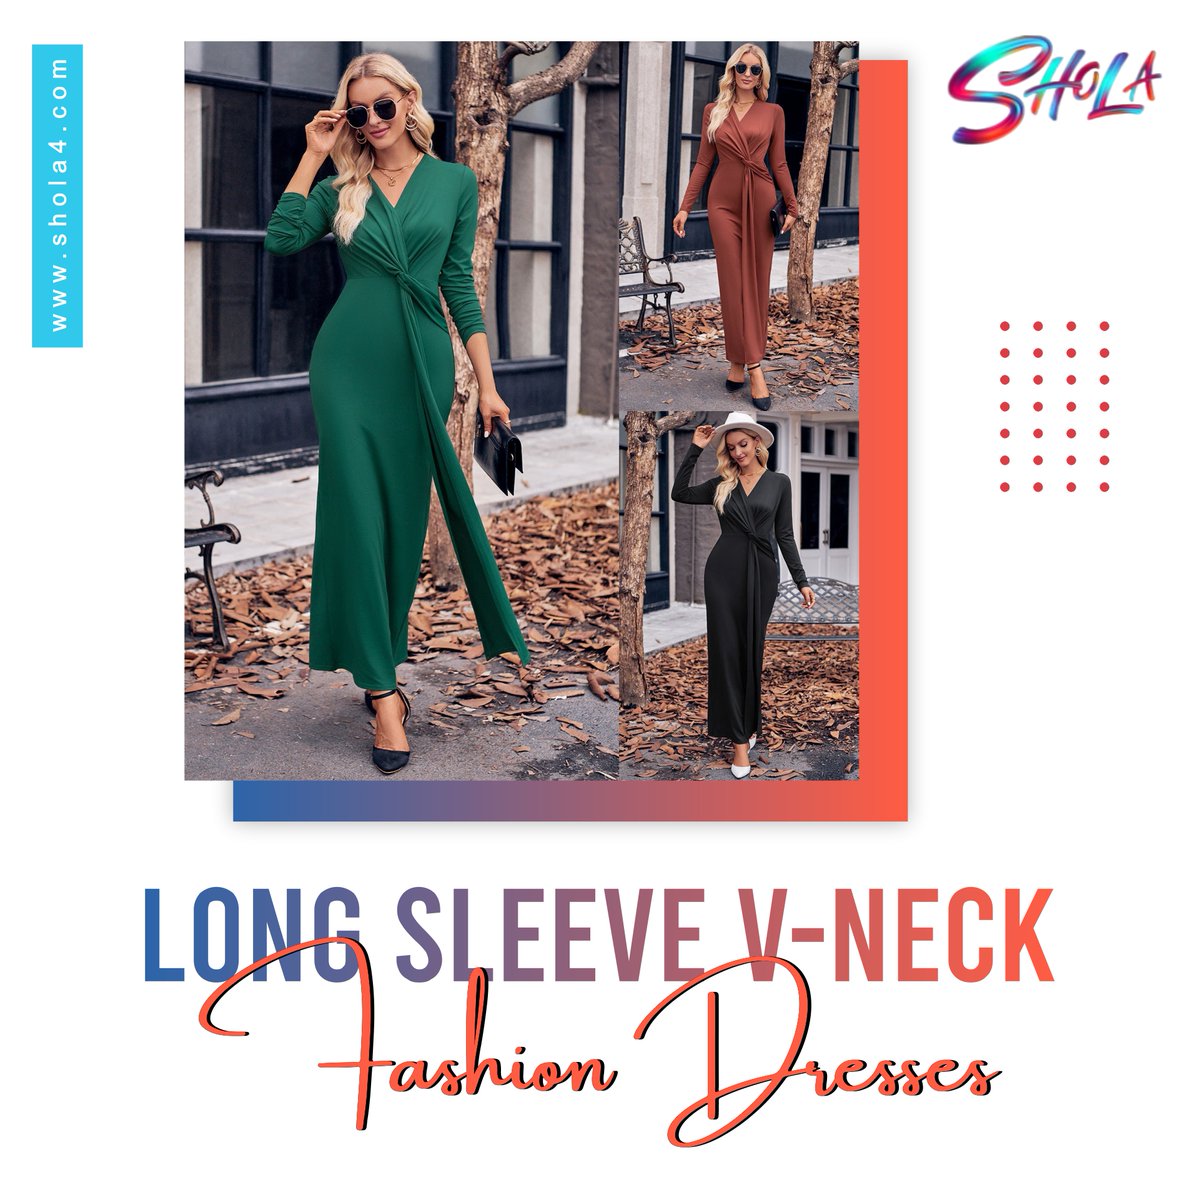 Elegance in every stitch! Discover our LONG-SLEEVE V-NECK FASHION DRESSES. 👗💃✨ #FashionElegance
---
🛍️ bit.ly/45KZP0e
.
#amhara #fano #ethiopia #ፋኖ #አማራ #ኢትዮጵያ #አማራፋኖ #FashionDresses
#LongSleeveDresses
#VNeckDresses
#TrendyFashion